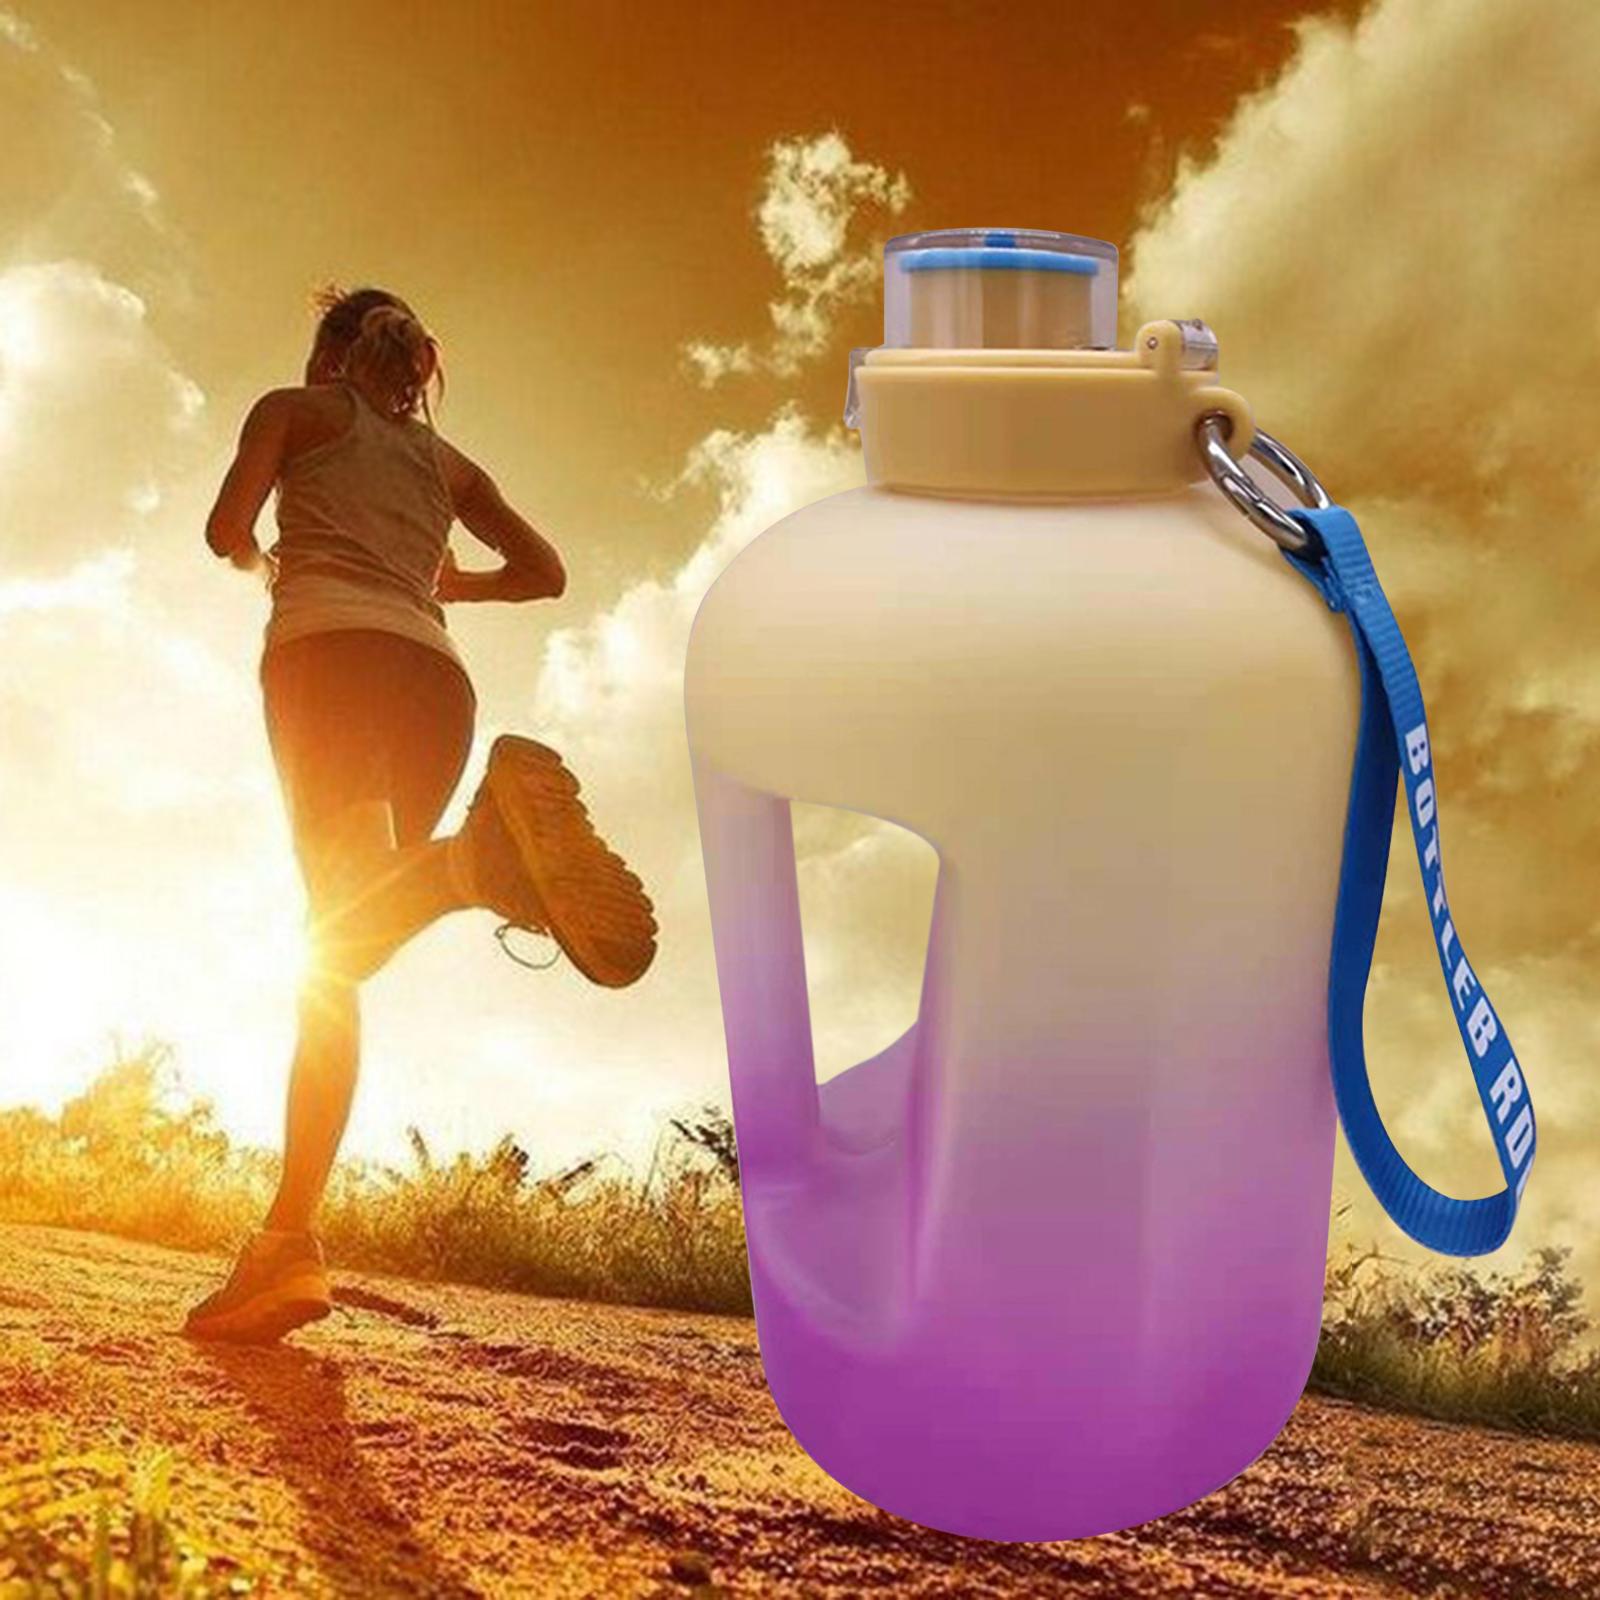 Plastic BPA Free Water Bottle Time Reminder Jug for Camping Outdoor Activity Yellow Purple